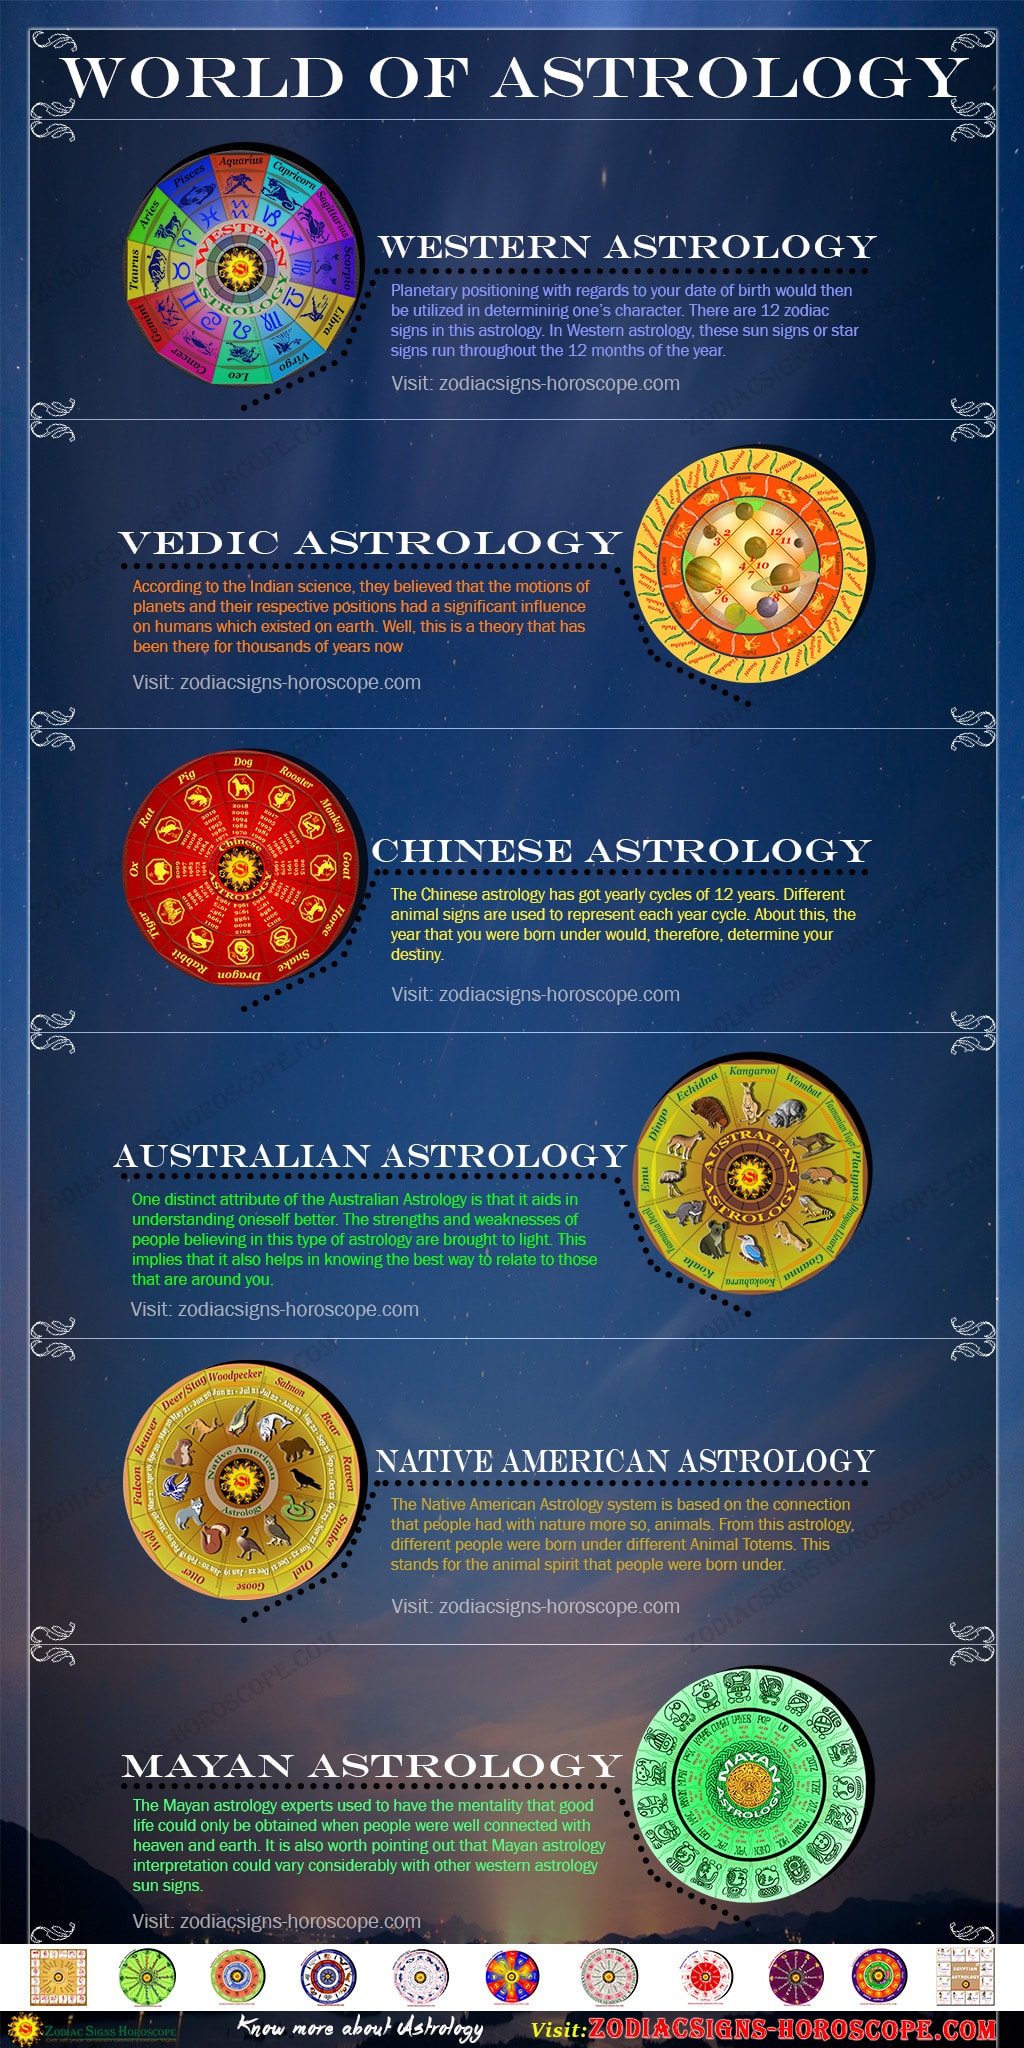 World Of Astrology - Astrology Infographic